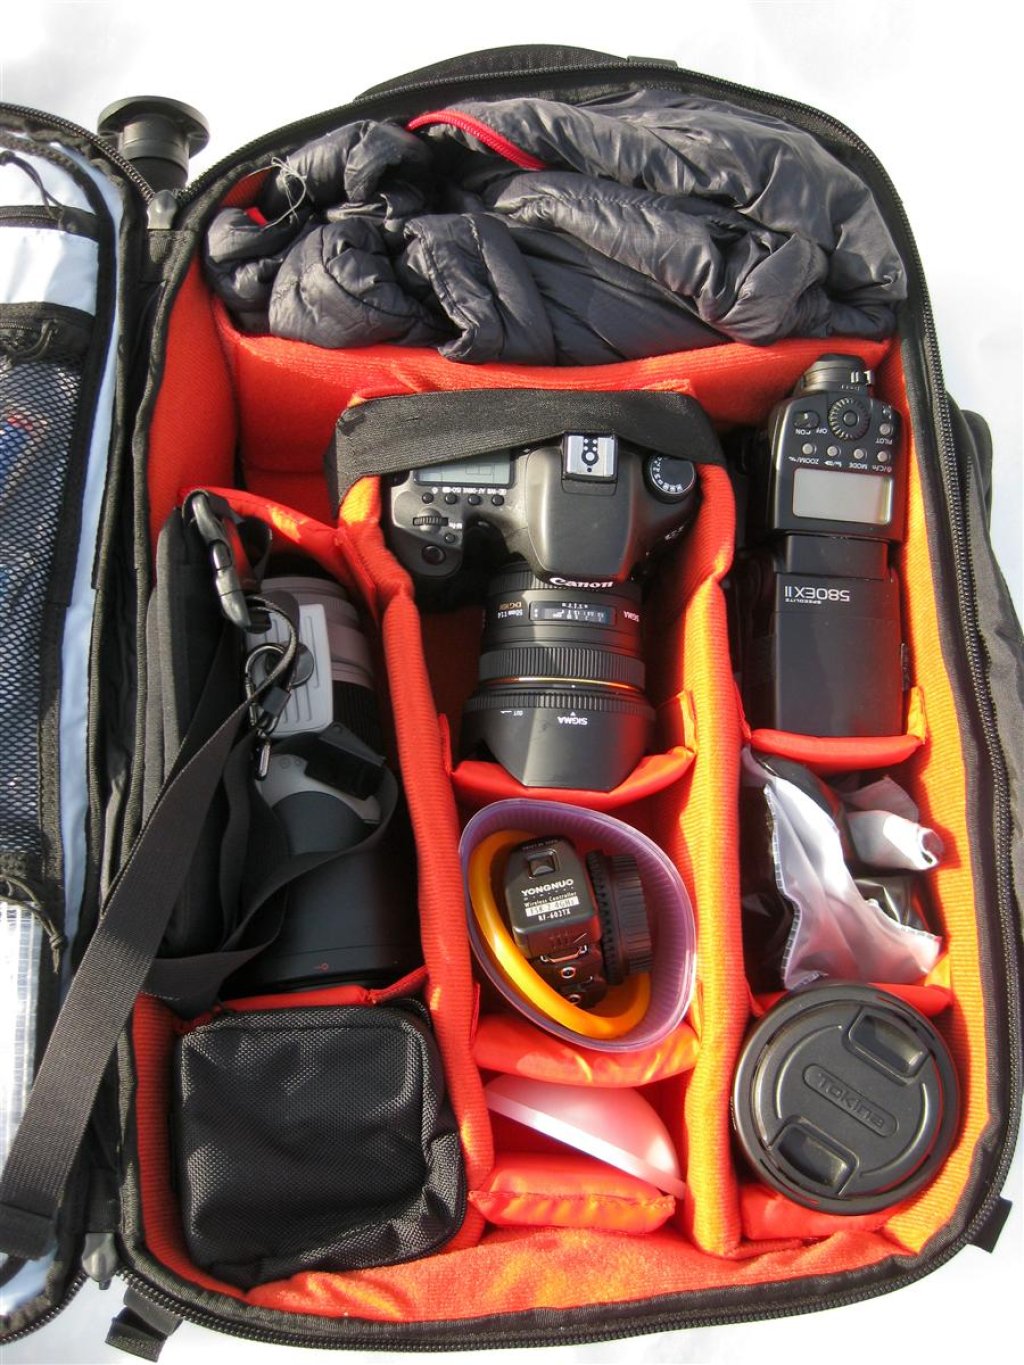 The very flexible camera compartment with useful padding easily accommodates all equipment, even for more complex shoots. The top section is also accessible through the front compartment